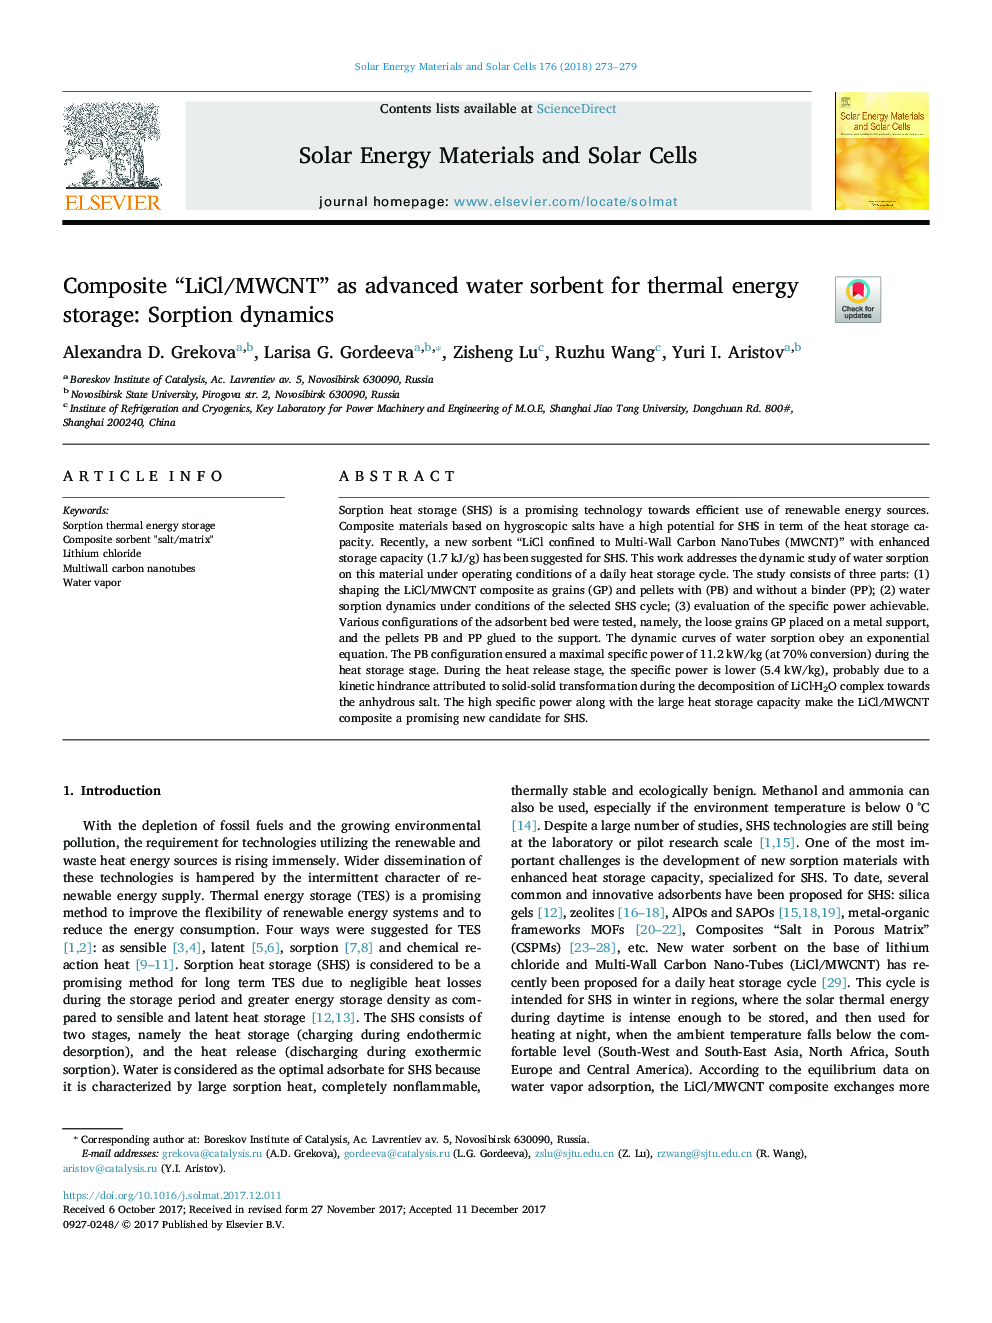 Composite “LiCl/MWCNT” as advanced water sorbent for thermal energy storage: Sorption dynamics